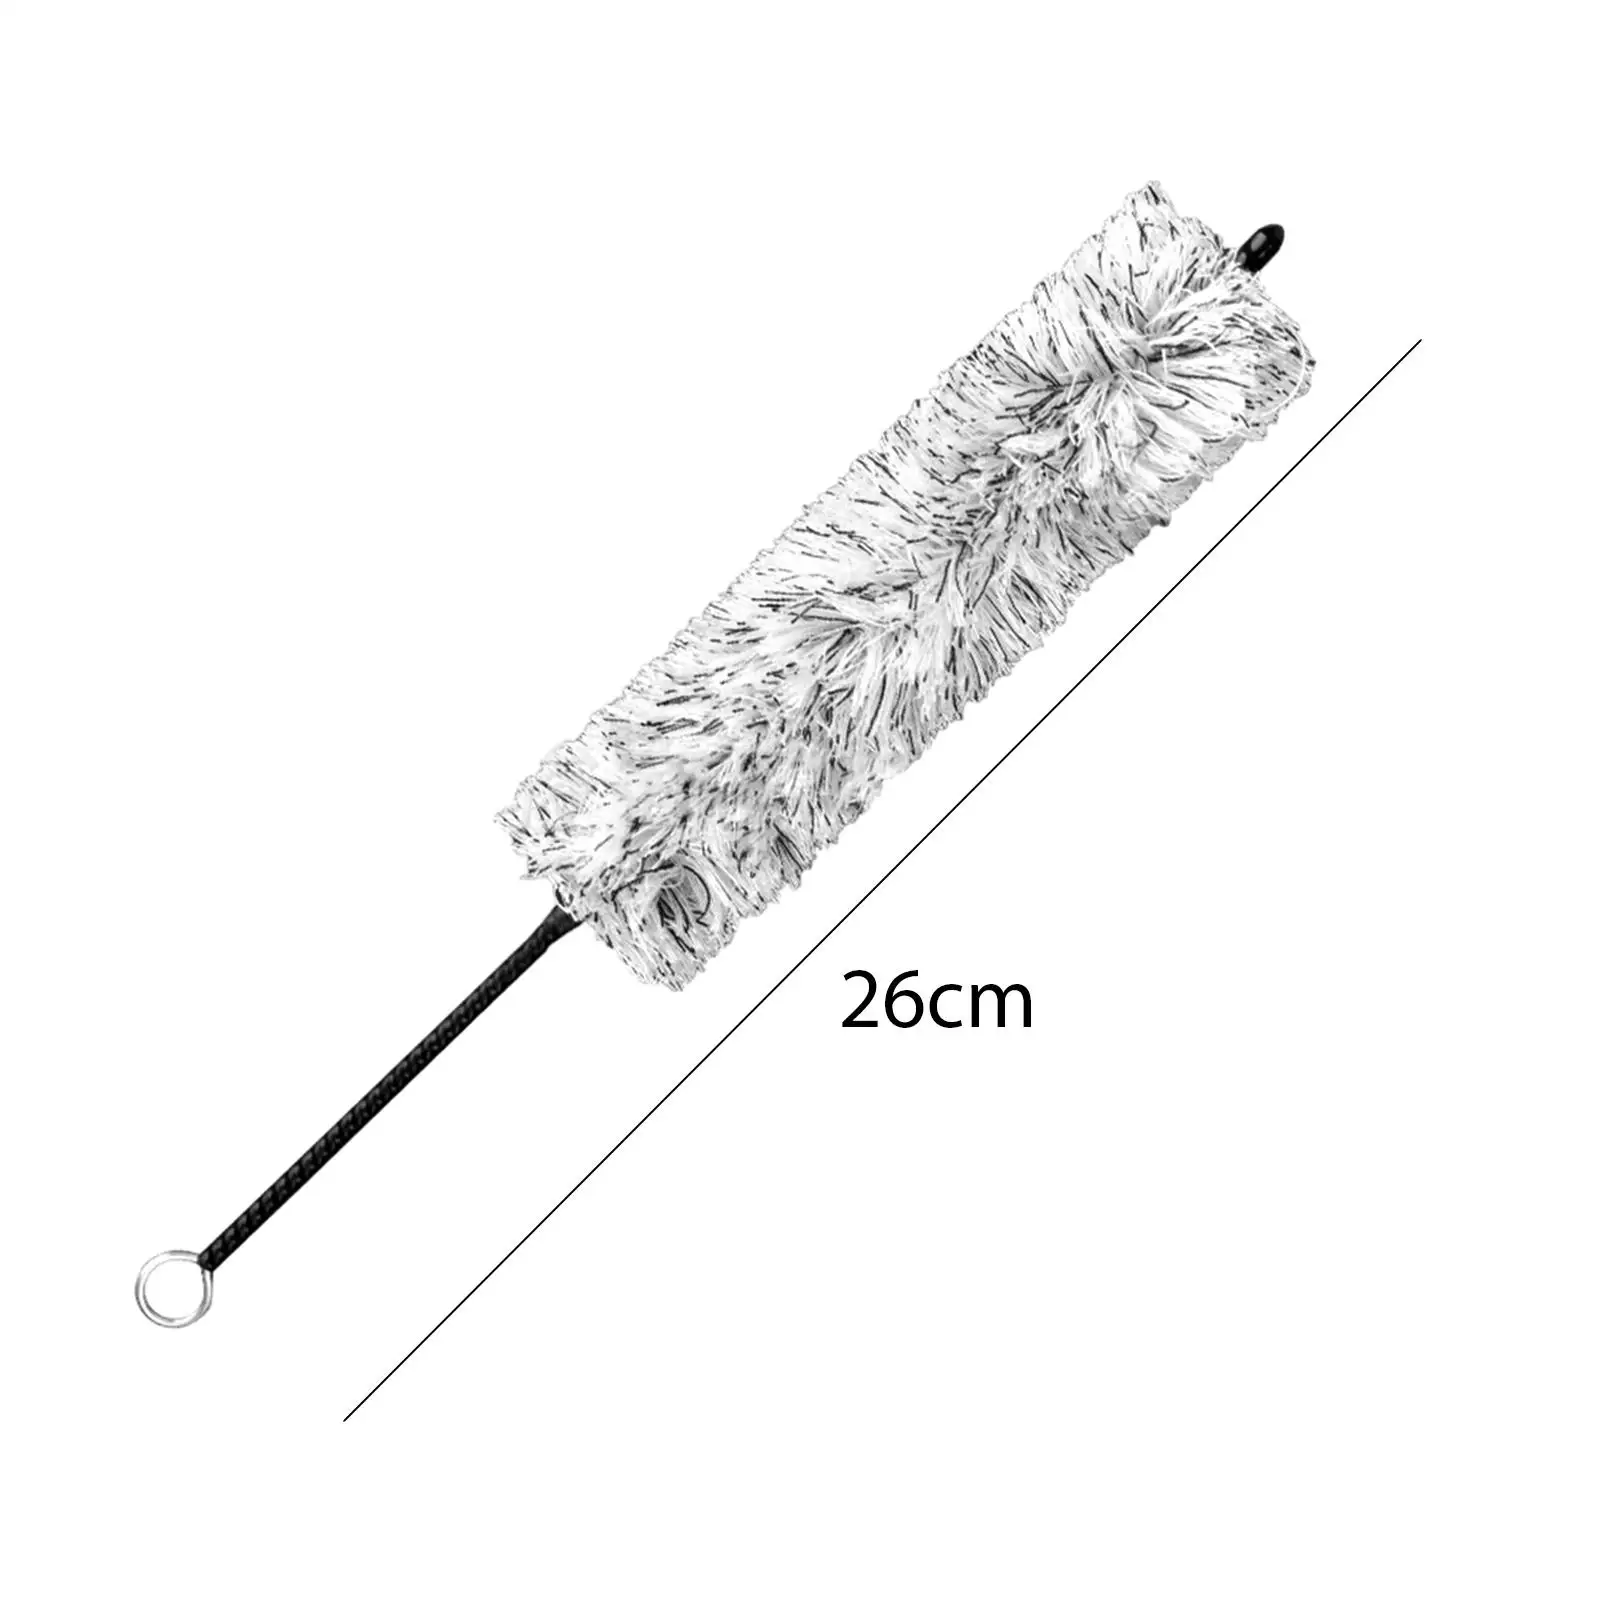 Microfiber Soft Clarinet Cleaning Brush, Pipe Cleaner Durable Soft Cleaning Brush